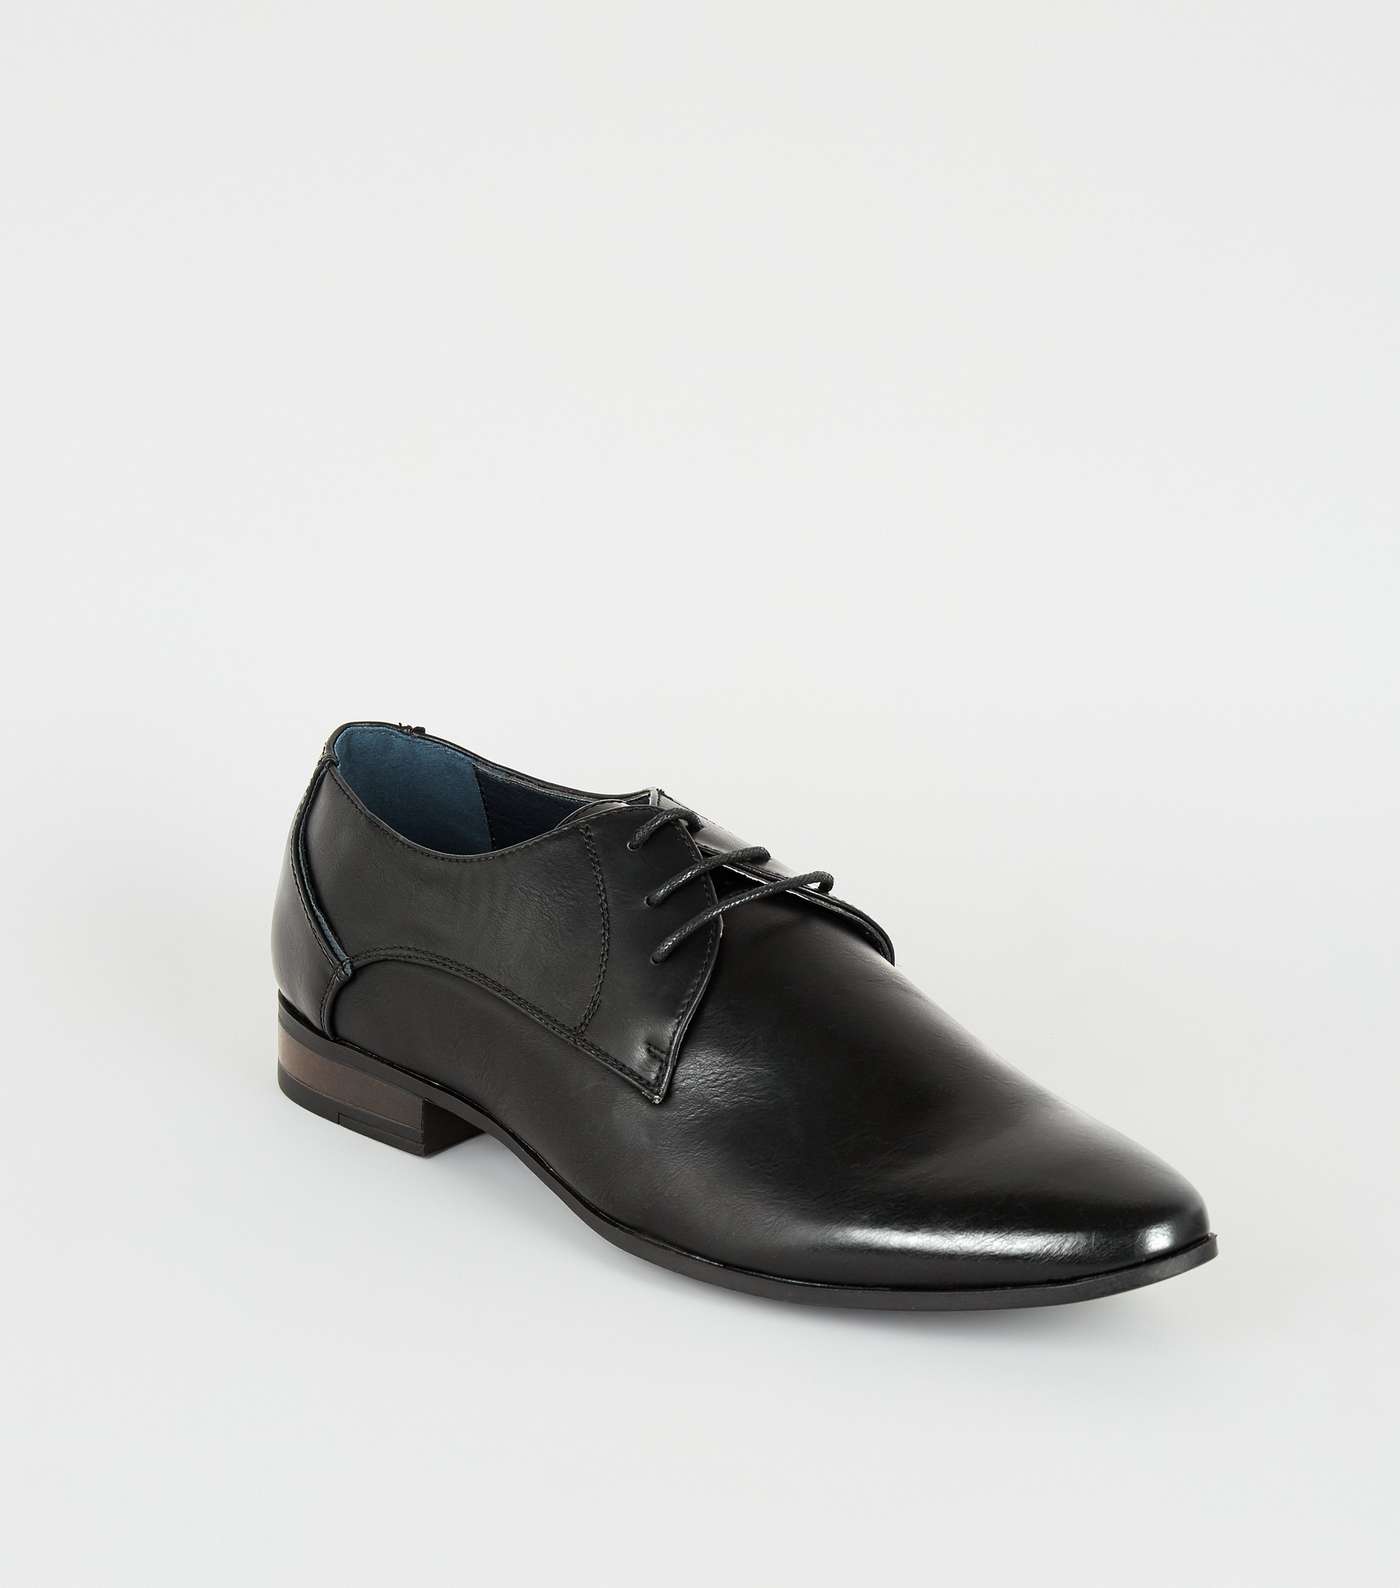 Black Leather-Look Lace Up Formal Shoes